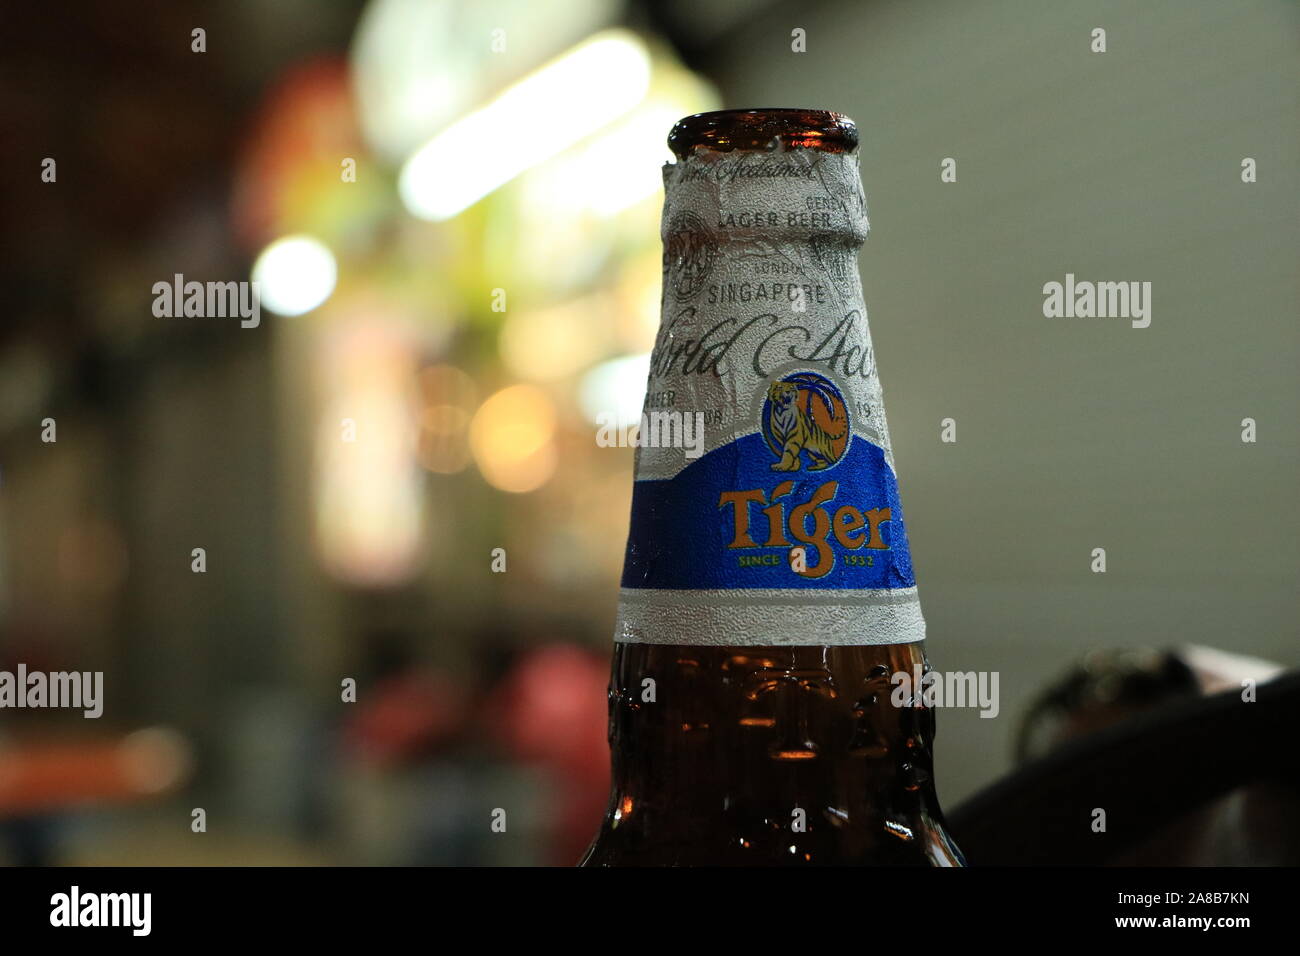 Picturesque Tiger Beer Stock Photo